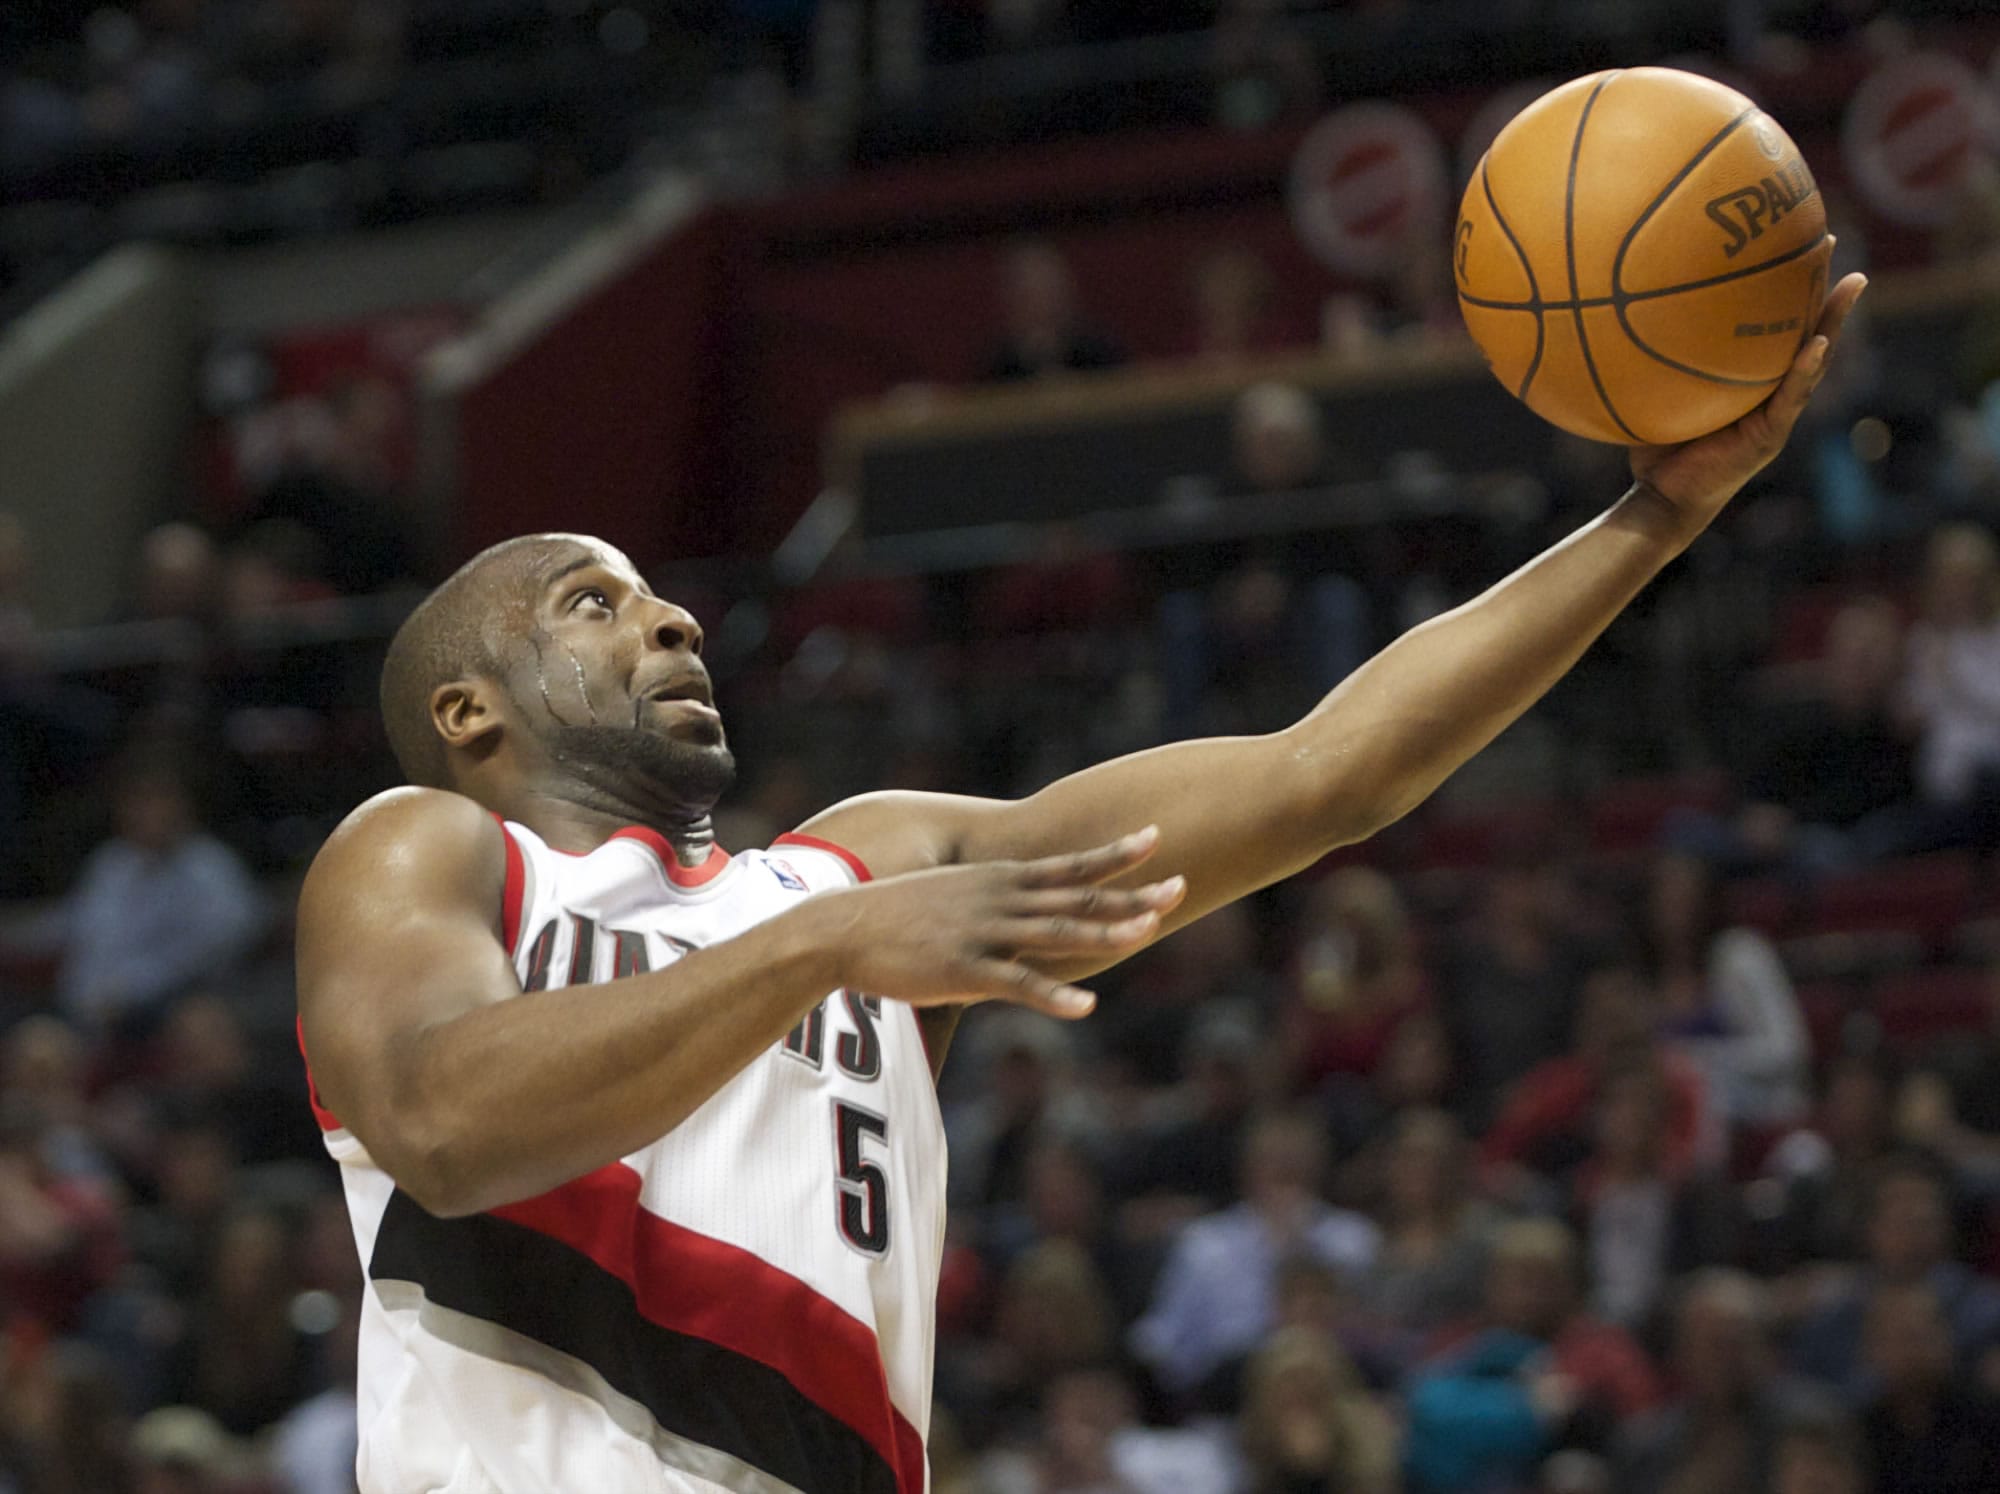 Steven Lane/Columbian files
Raymond Felton wore out his welcome with Blazers fans last year, and he's likely to hear about it on Thursday.